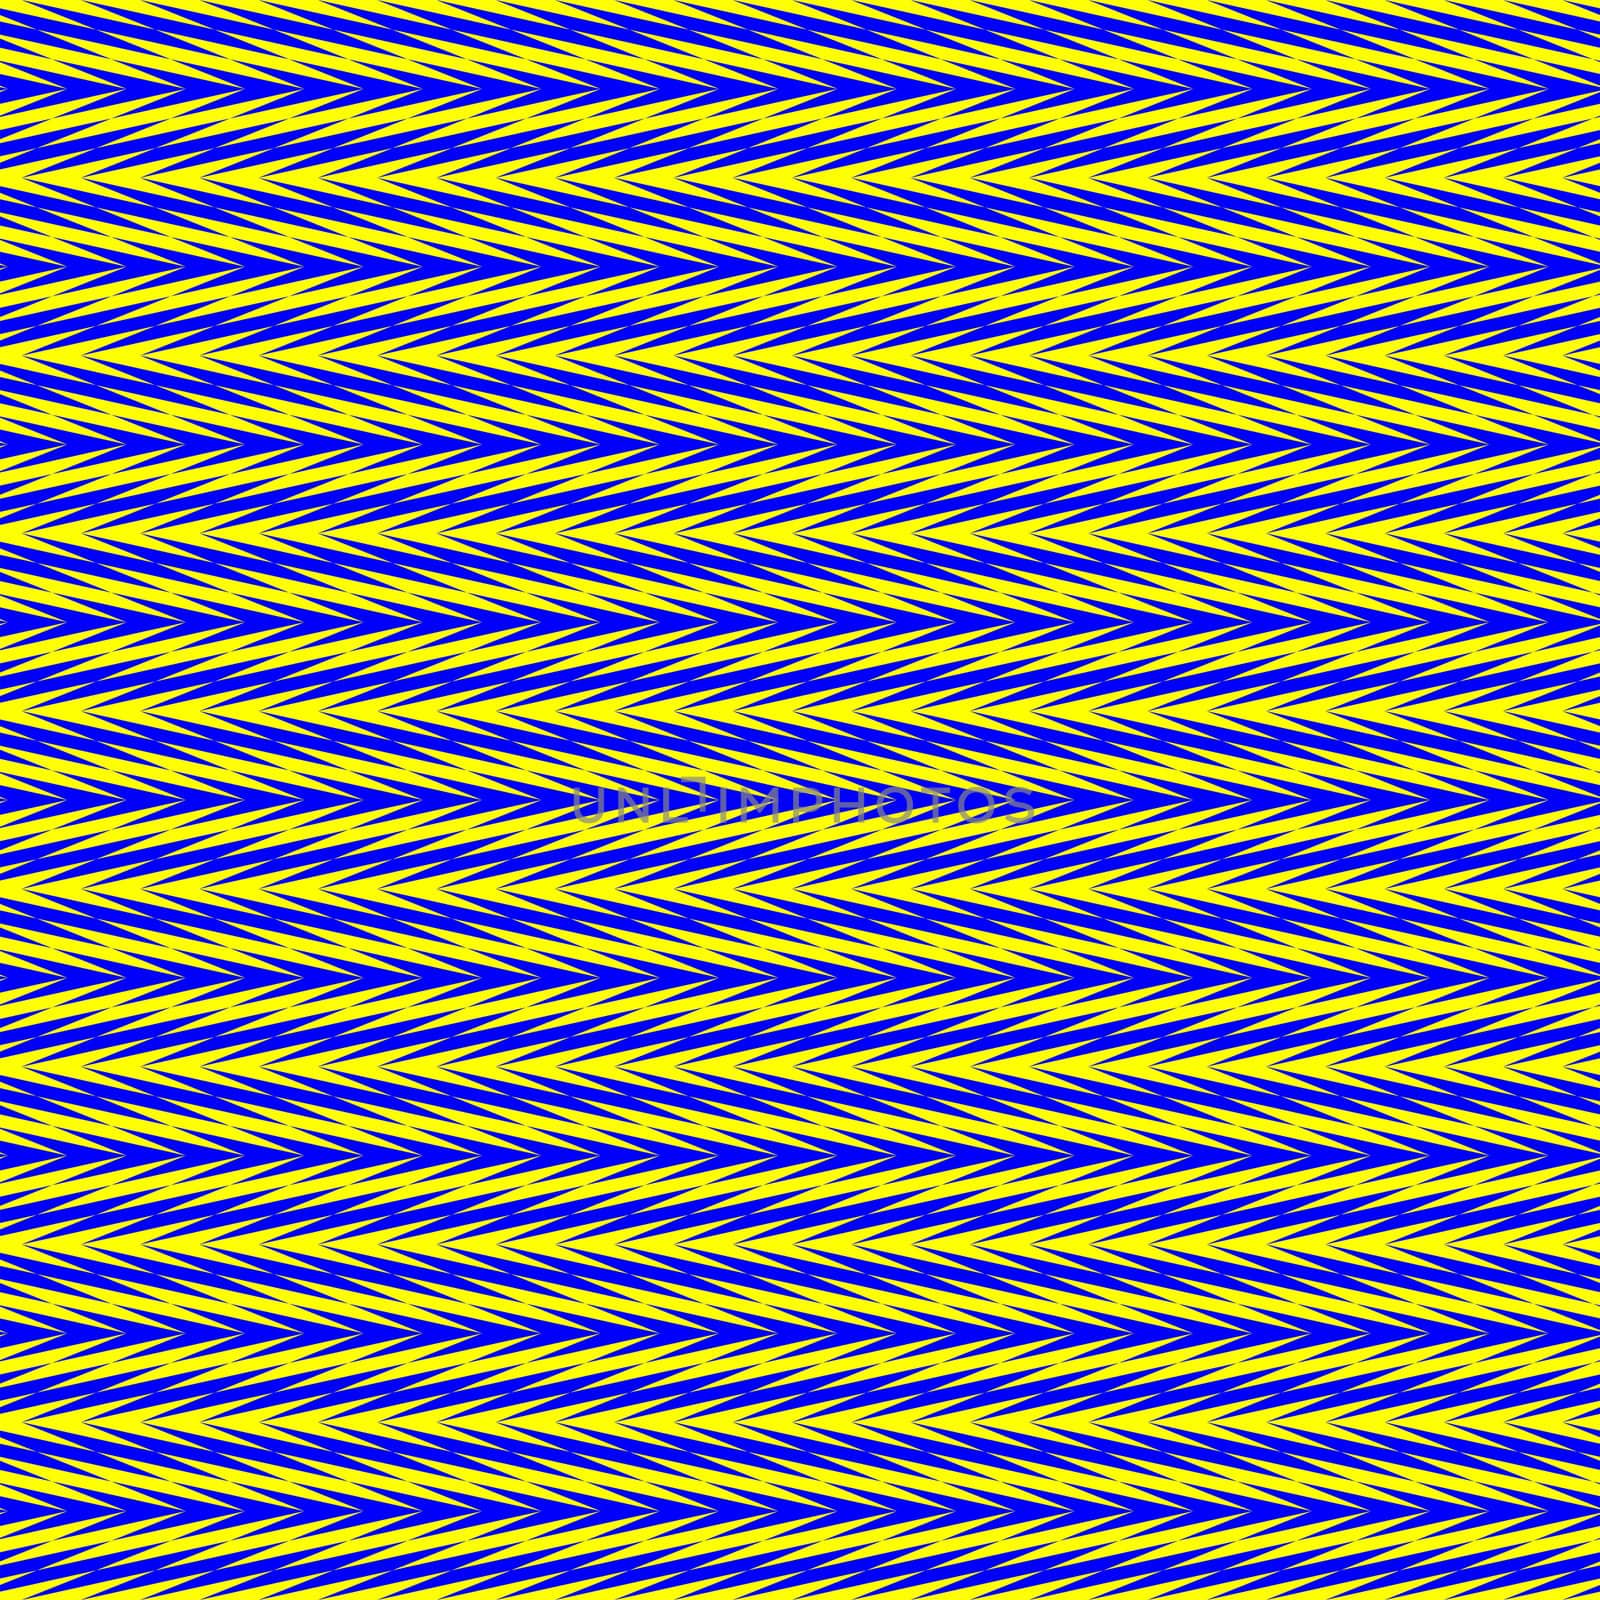 seamless texture of many blue or yellow arrows intertwined